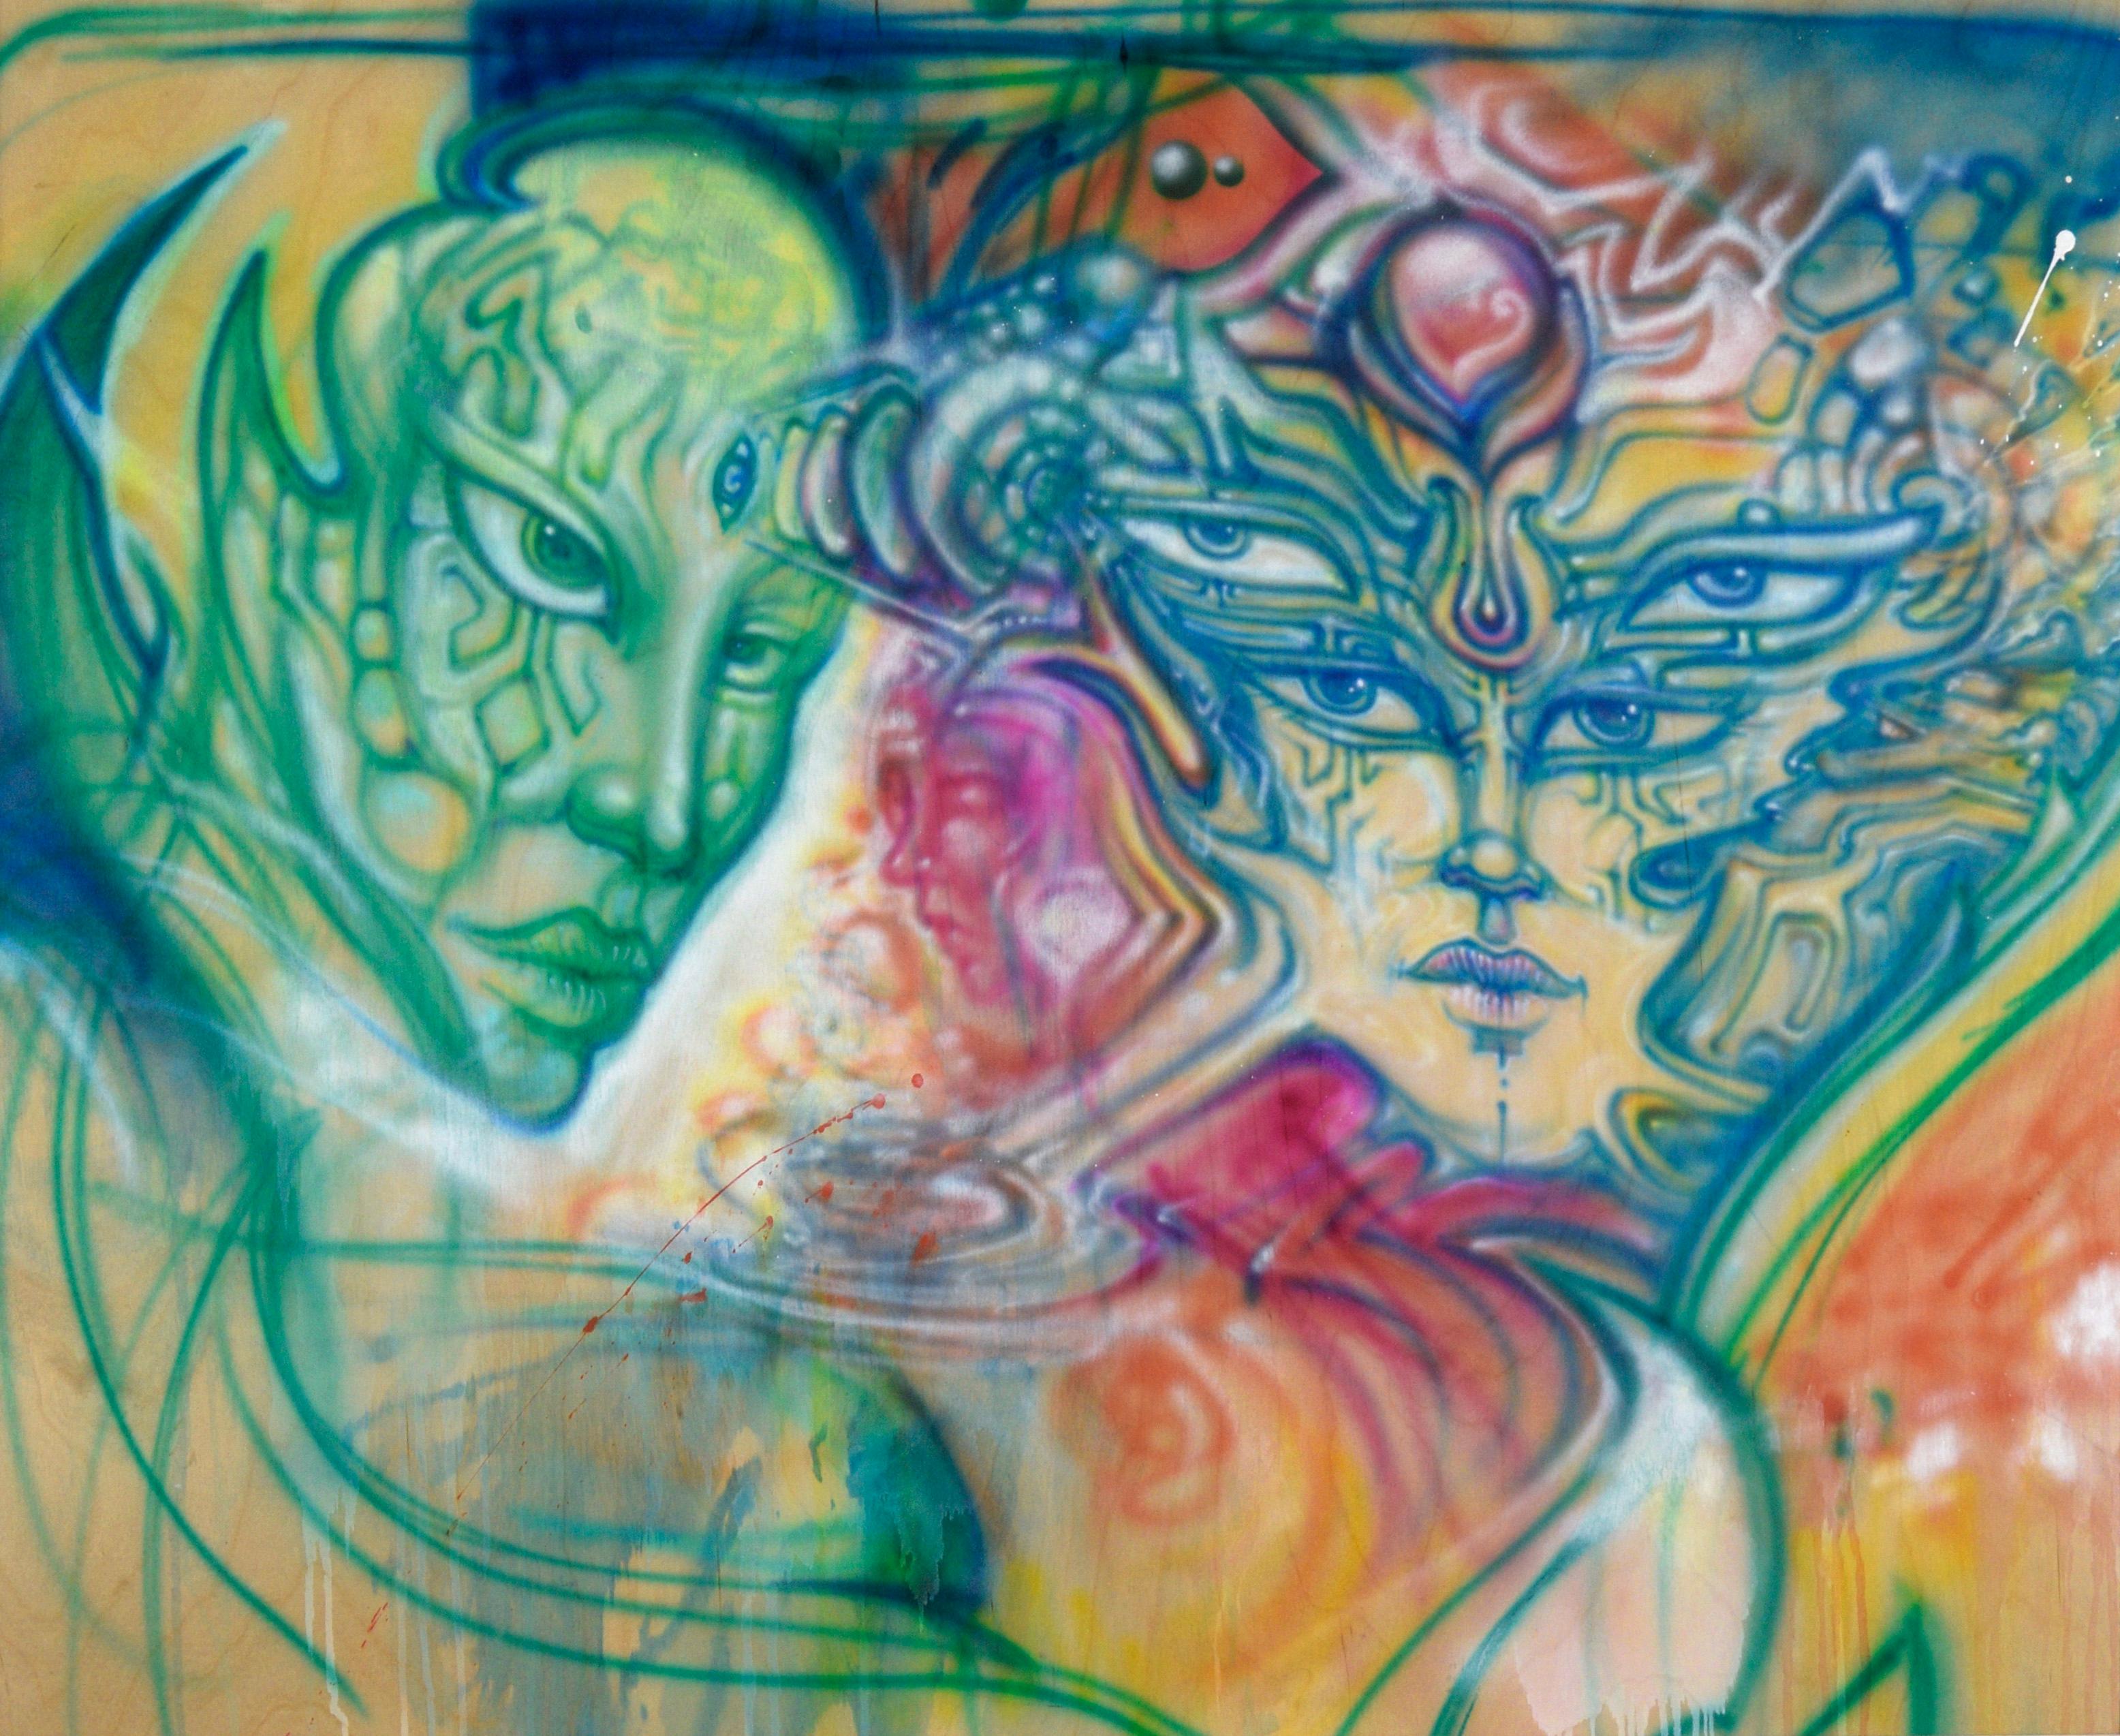 Cosmic Travelers - Visionary Psychedelic Composition on Wood Panel - Painting by Unknown